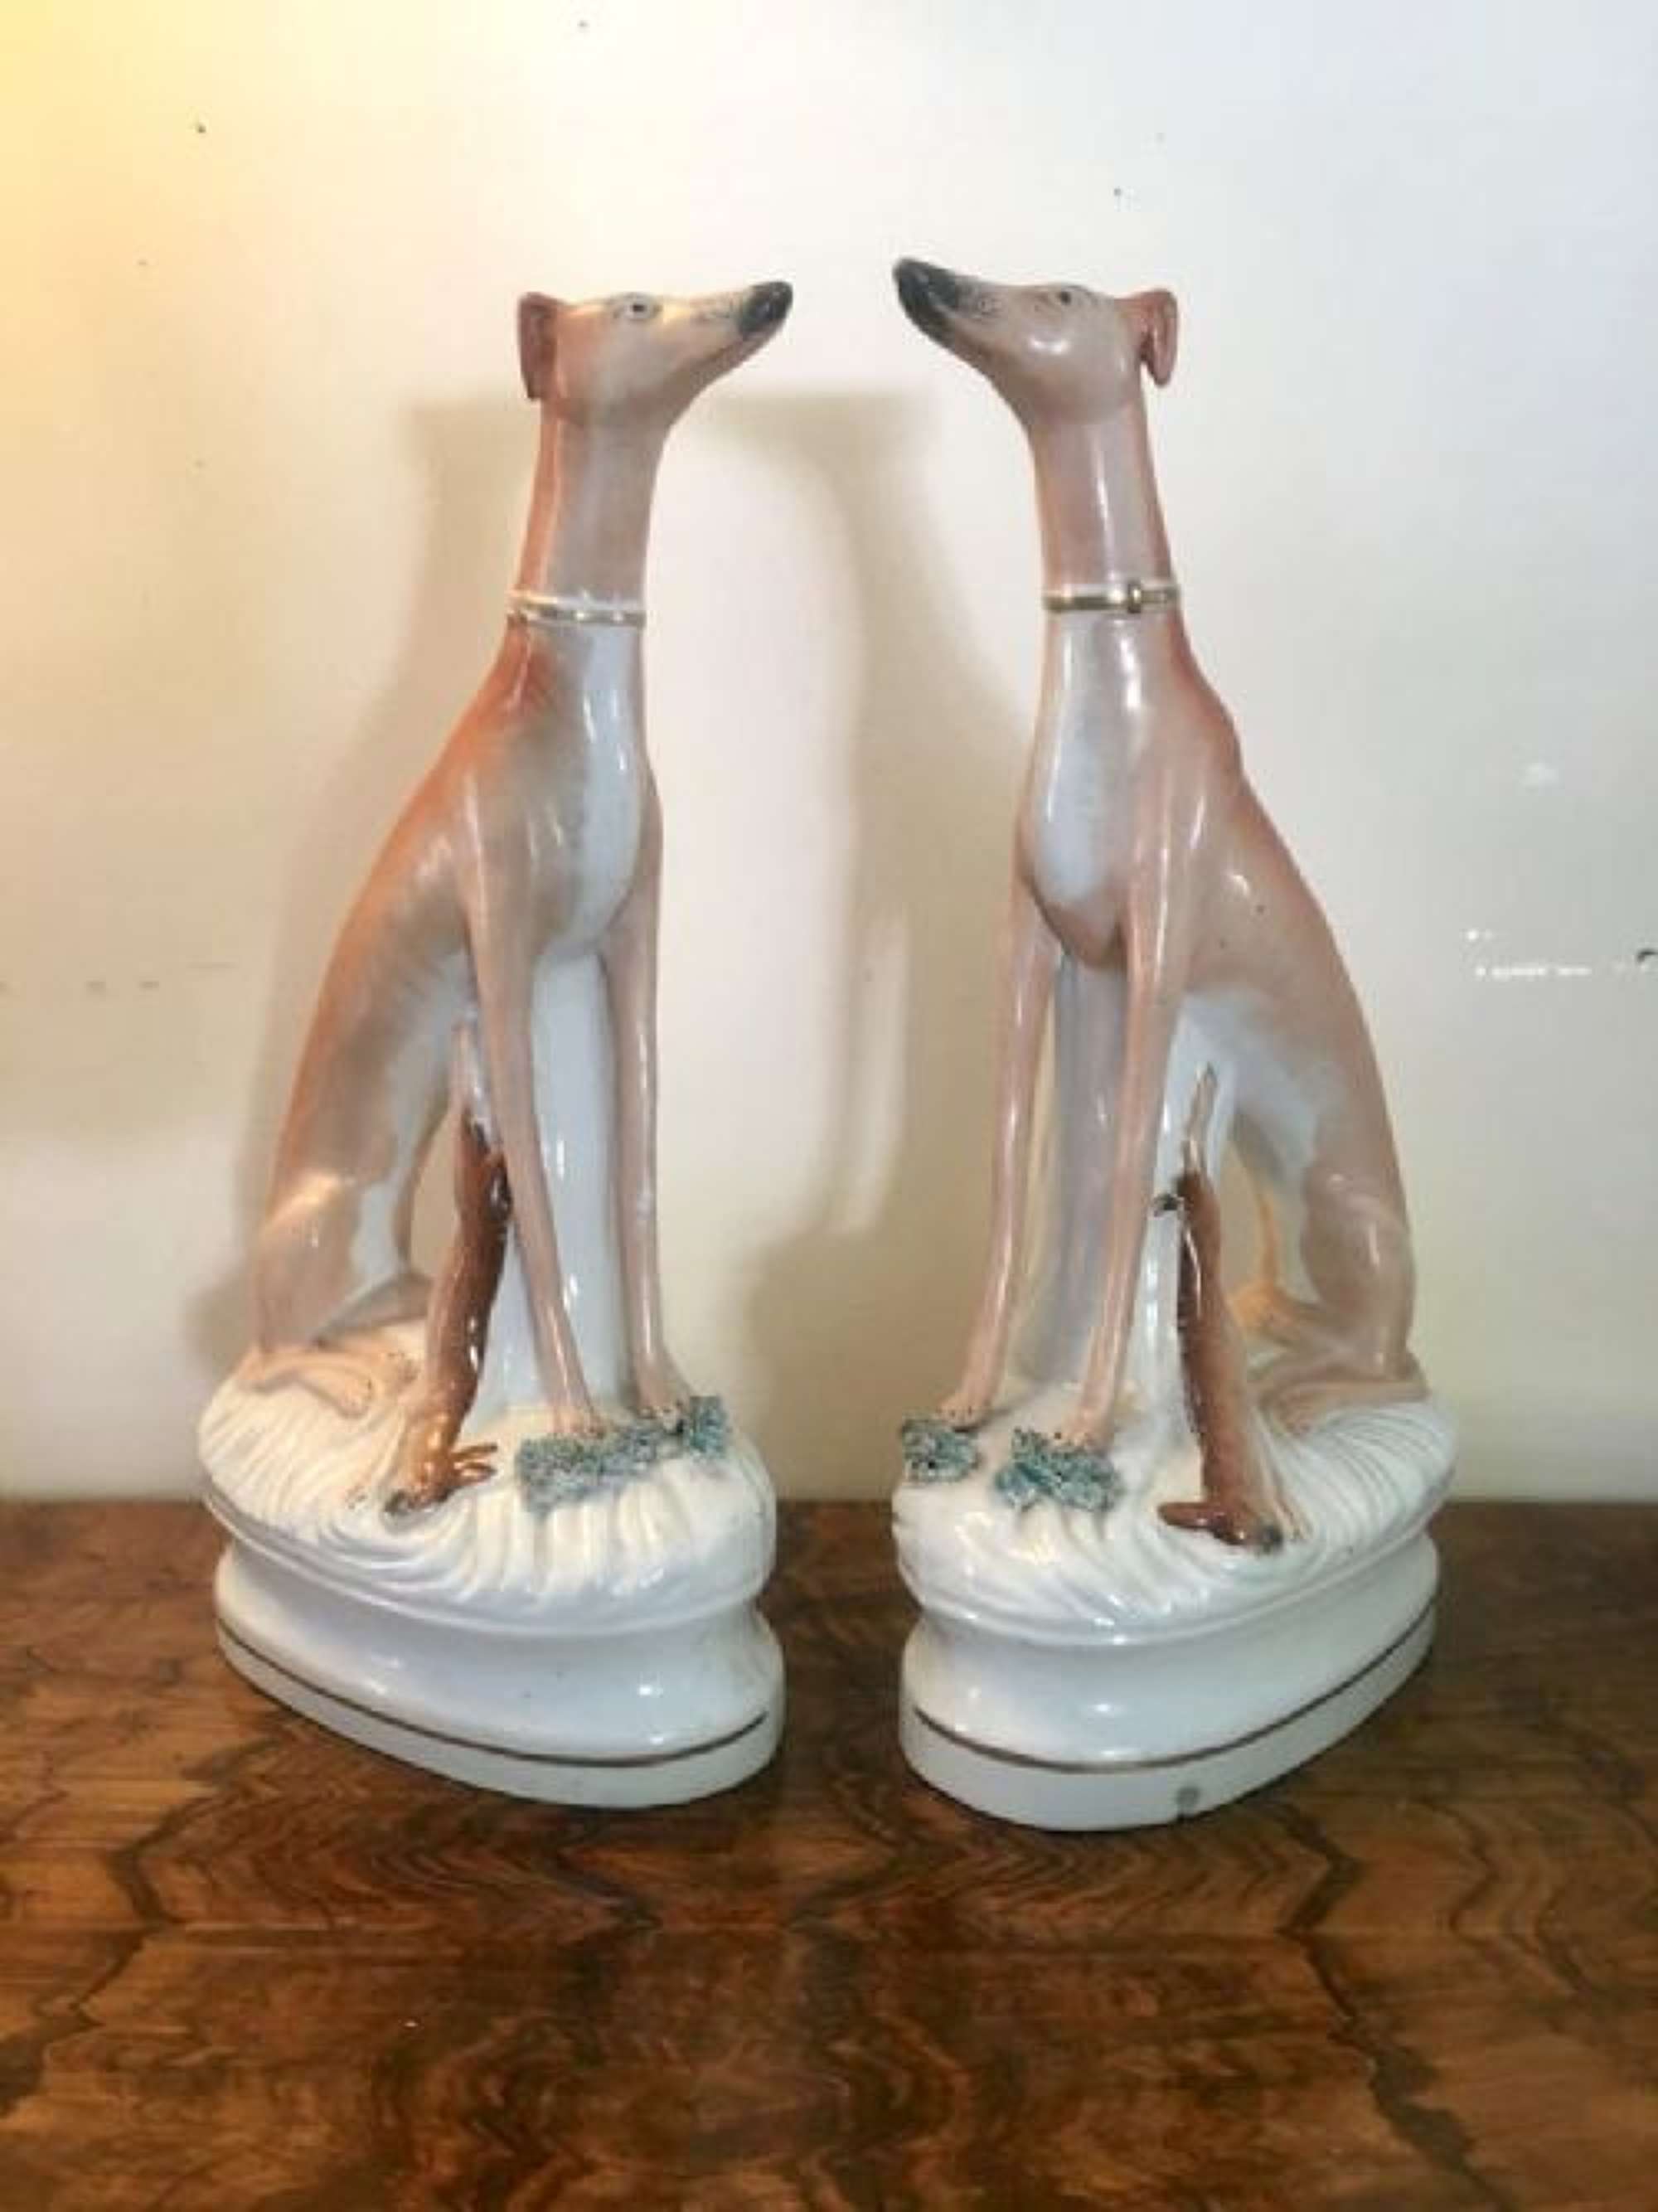 Fine Pair Of Antique Staffordshire Greyhounds C.1840